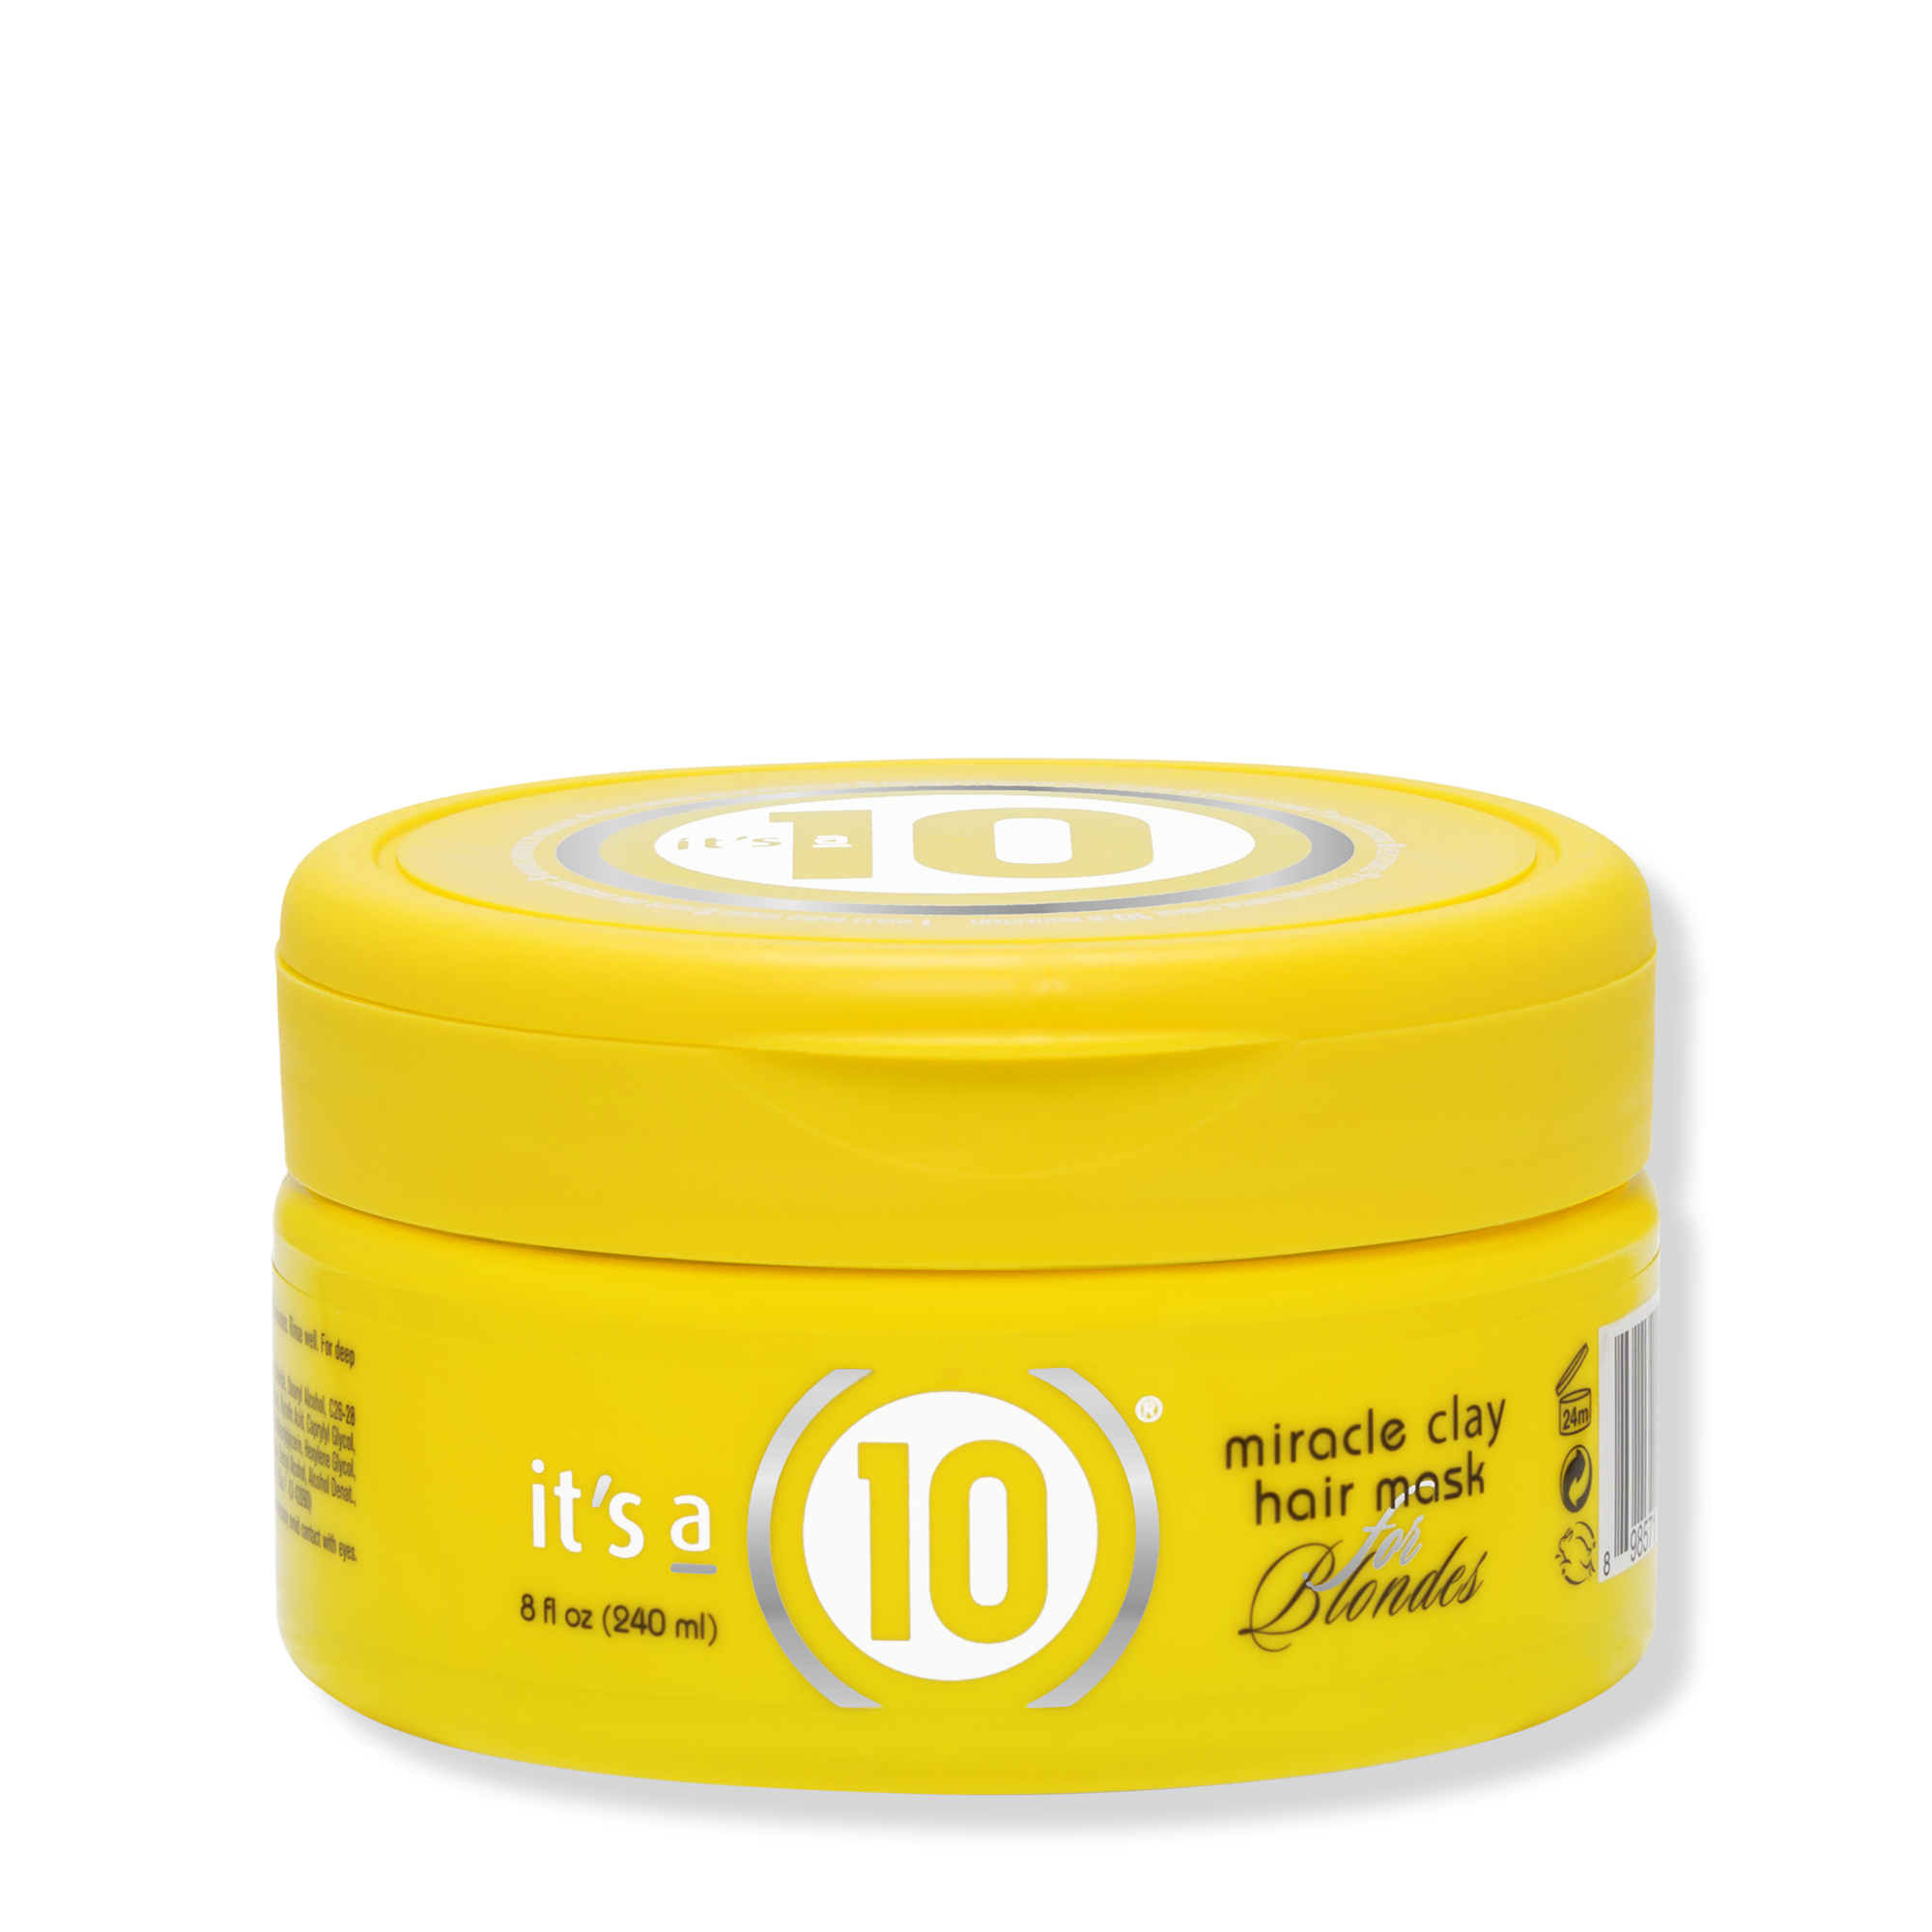 It's A 10 Miracle Clay Hair Mask For Blondes / 8OZ